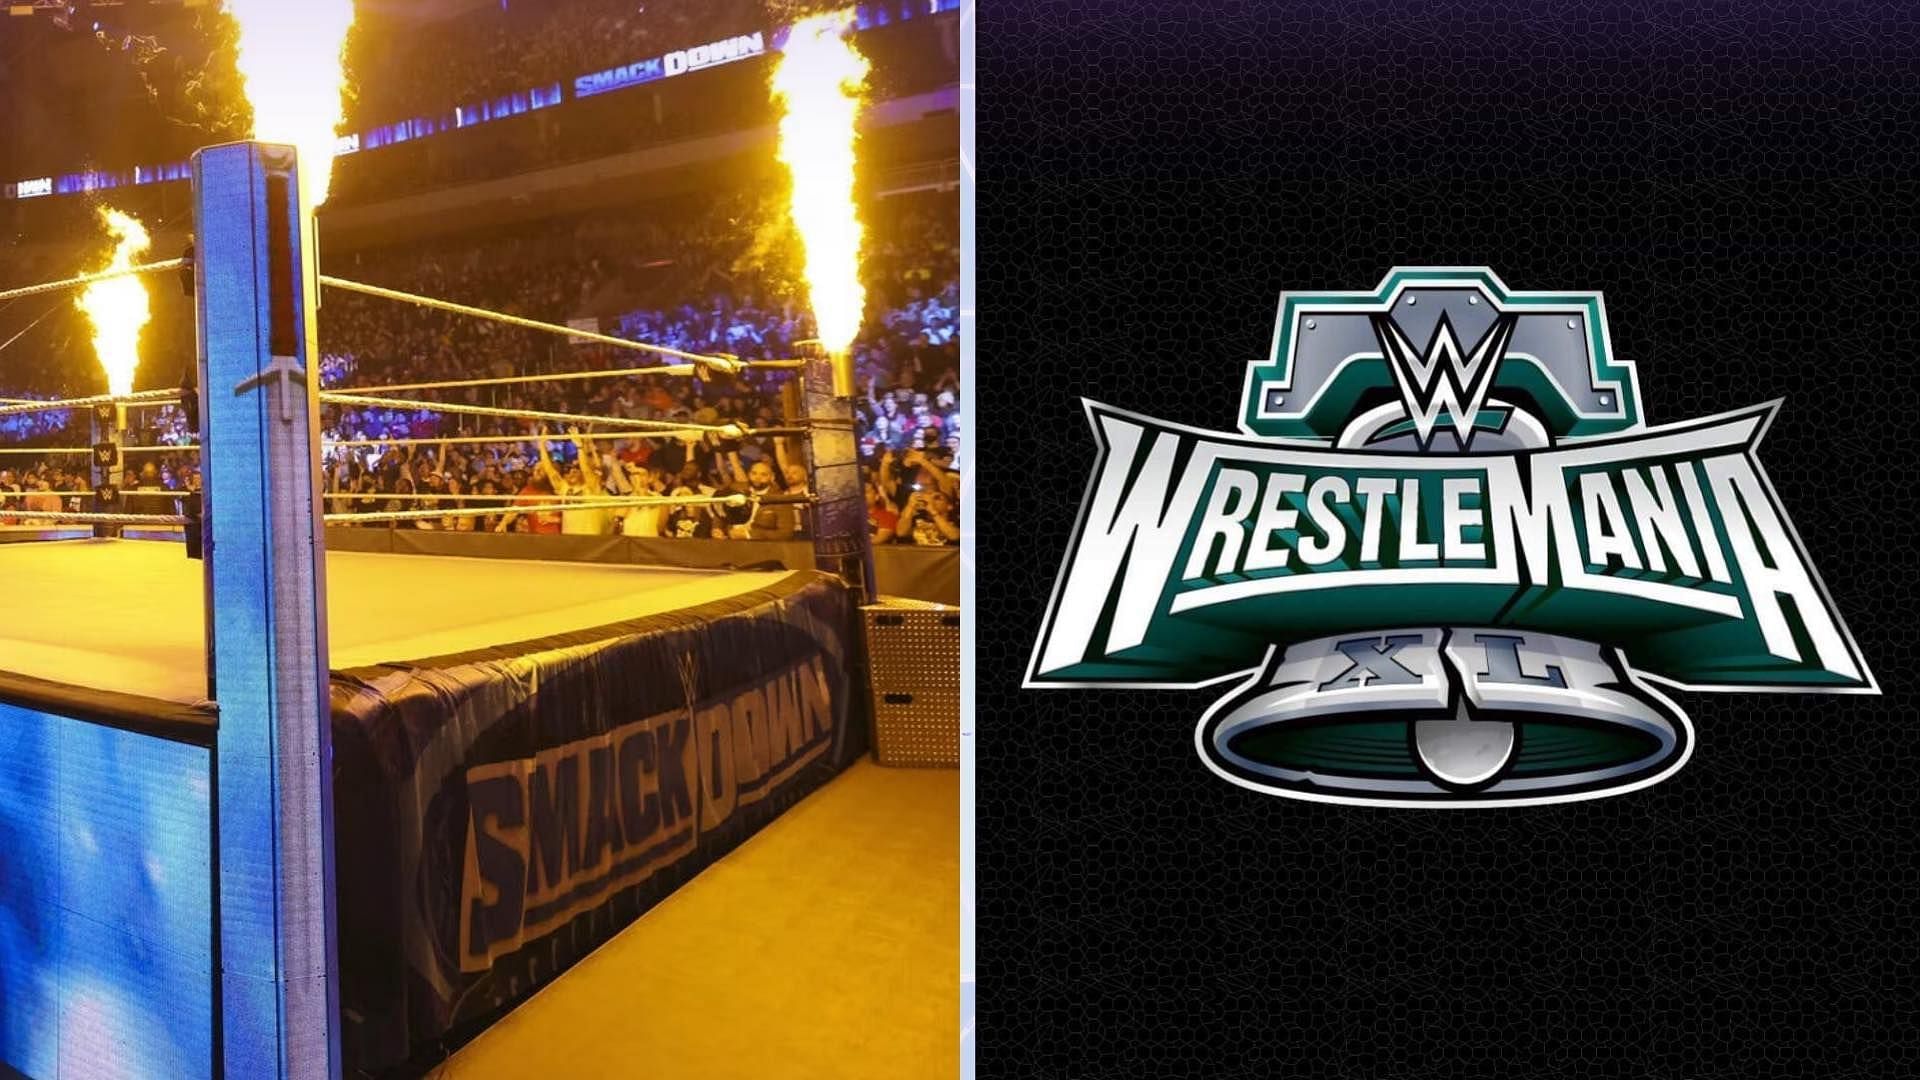 Wrestlemania 40 is set to take place at Lincoln Financial Field in Philadelphia 